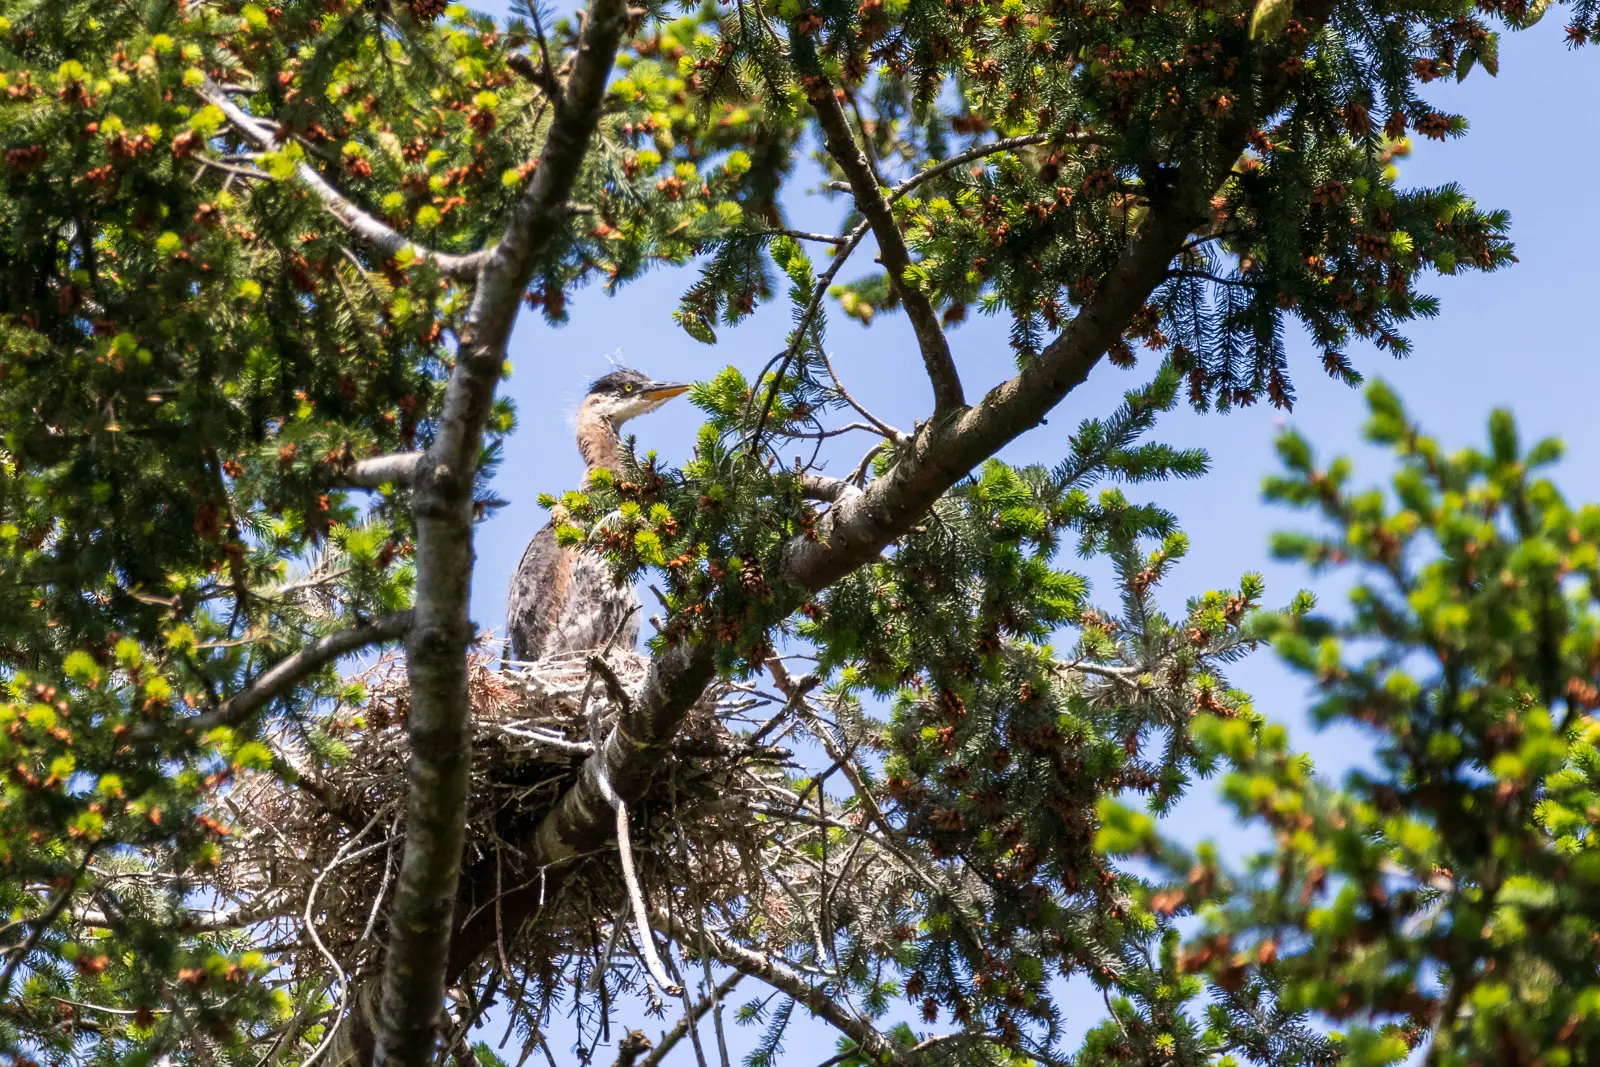 Heron chick in a nest at Beacon Hill park in Victoria, BC